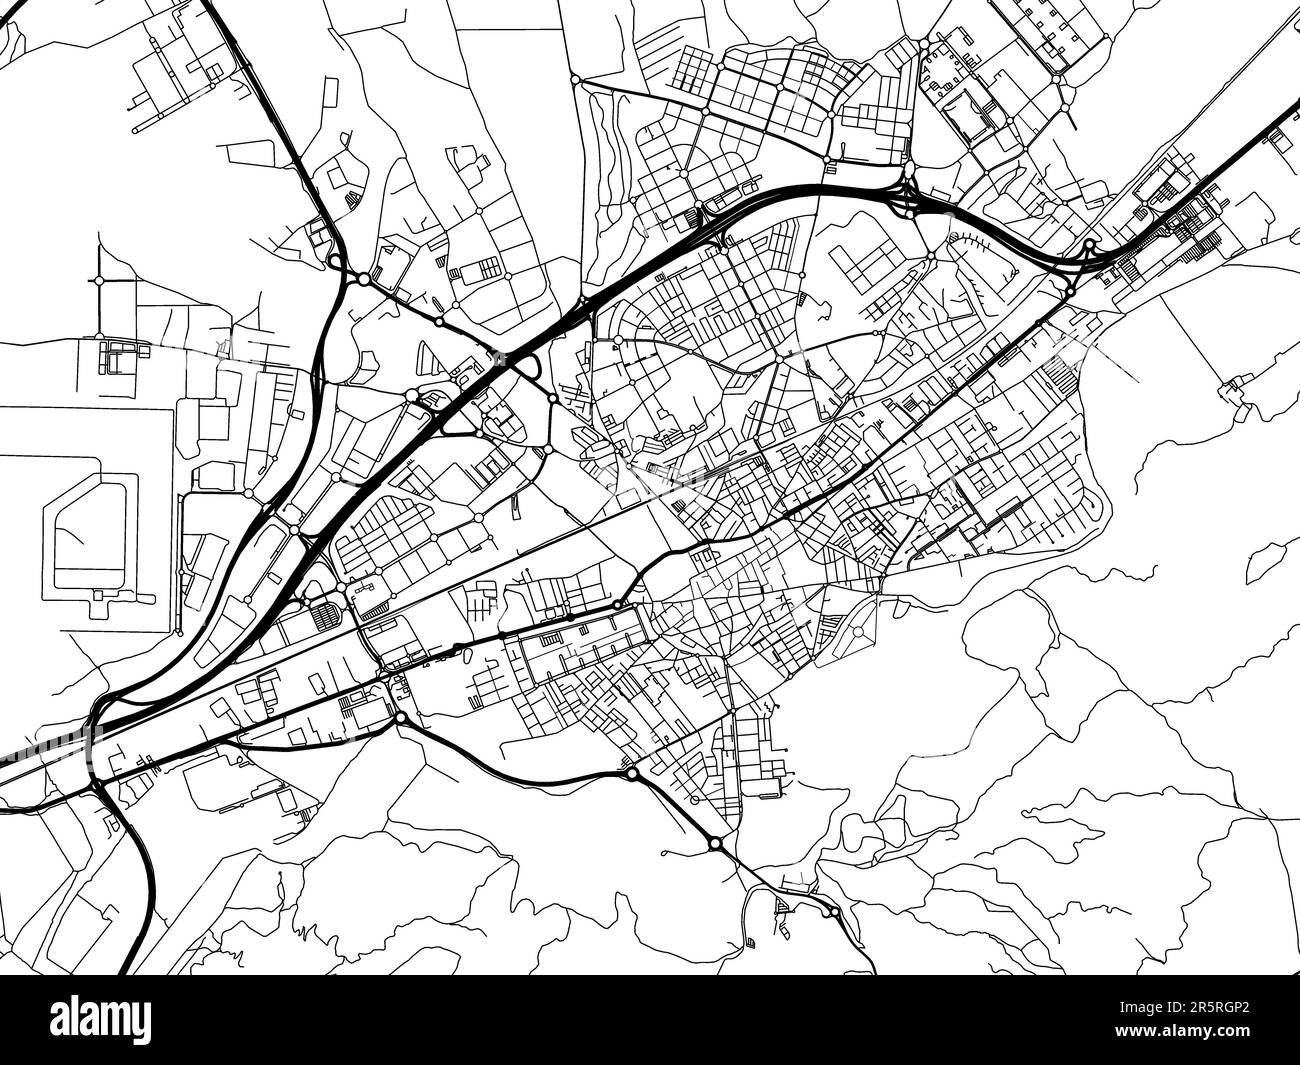 Vector road map of the city of  Alcala de Henares in Spain on a white background. Stock Photo